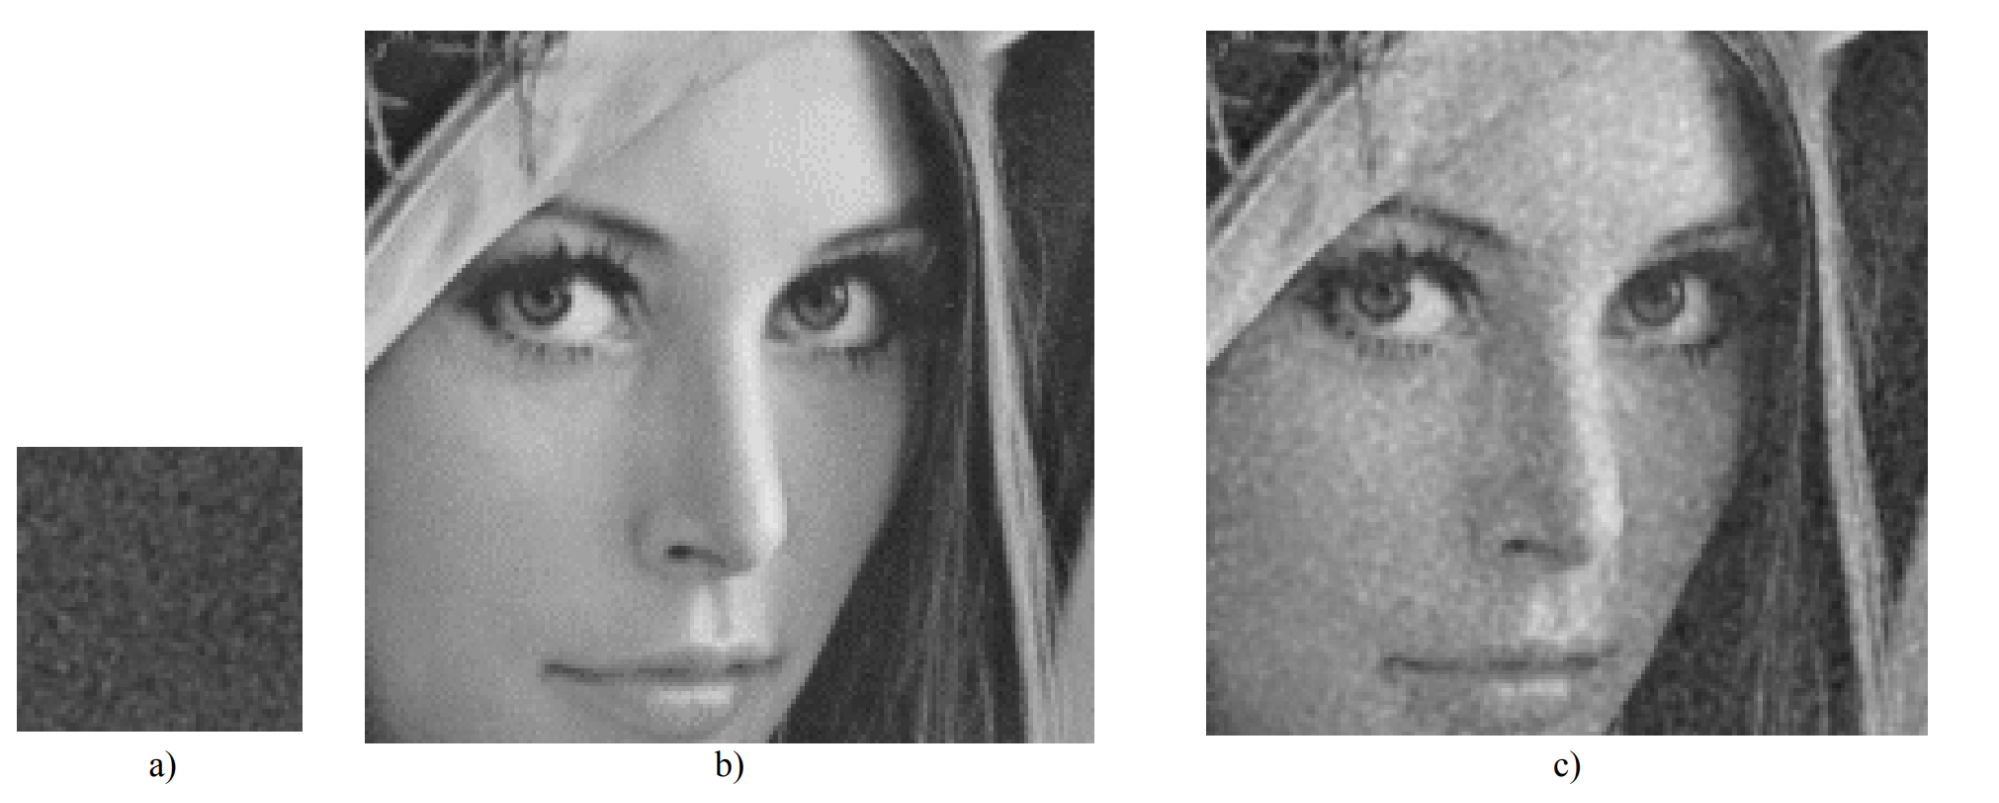 Example of grain synthesis: a) grain template, b) denoised picture, c) reconstructed picture with grain